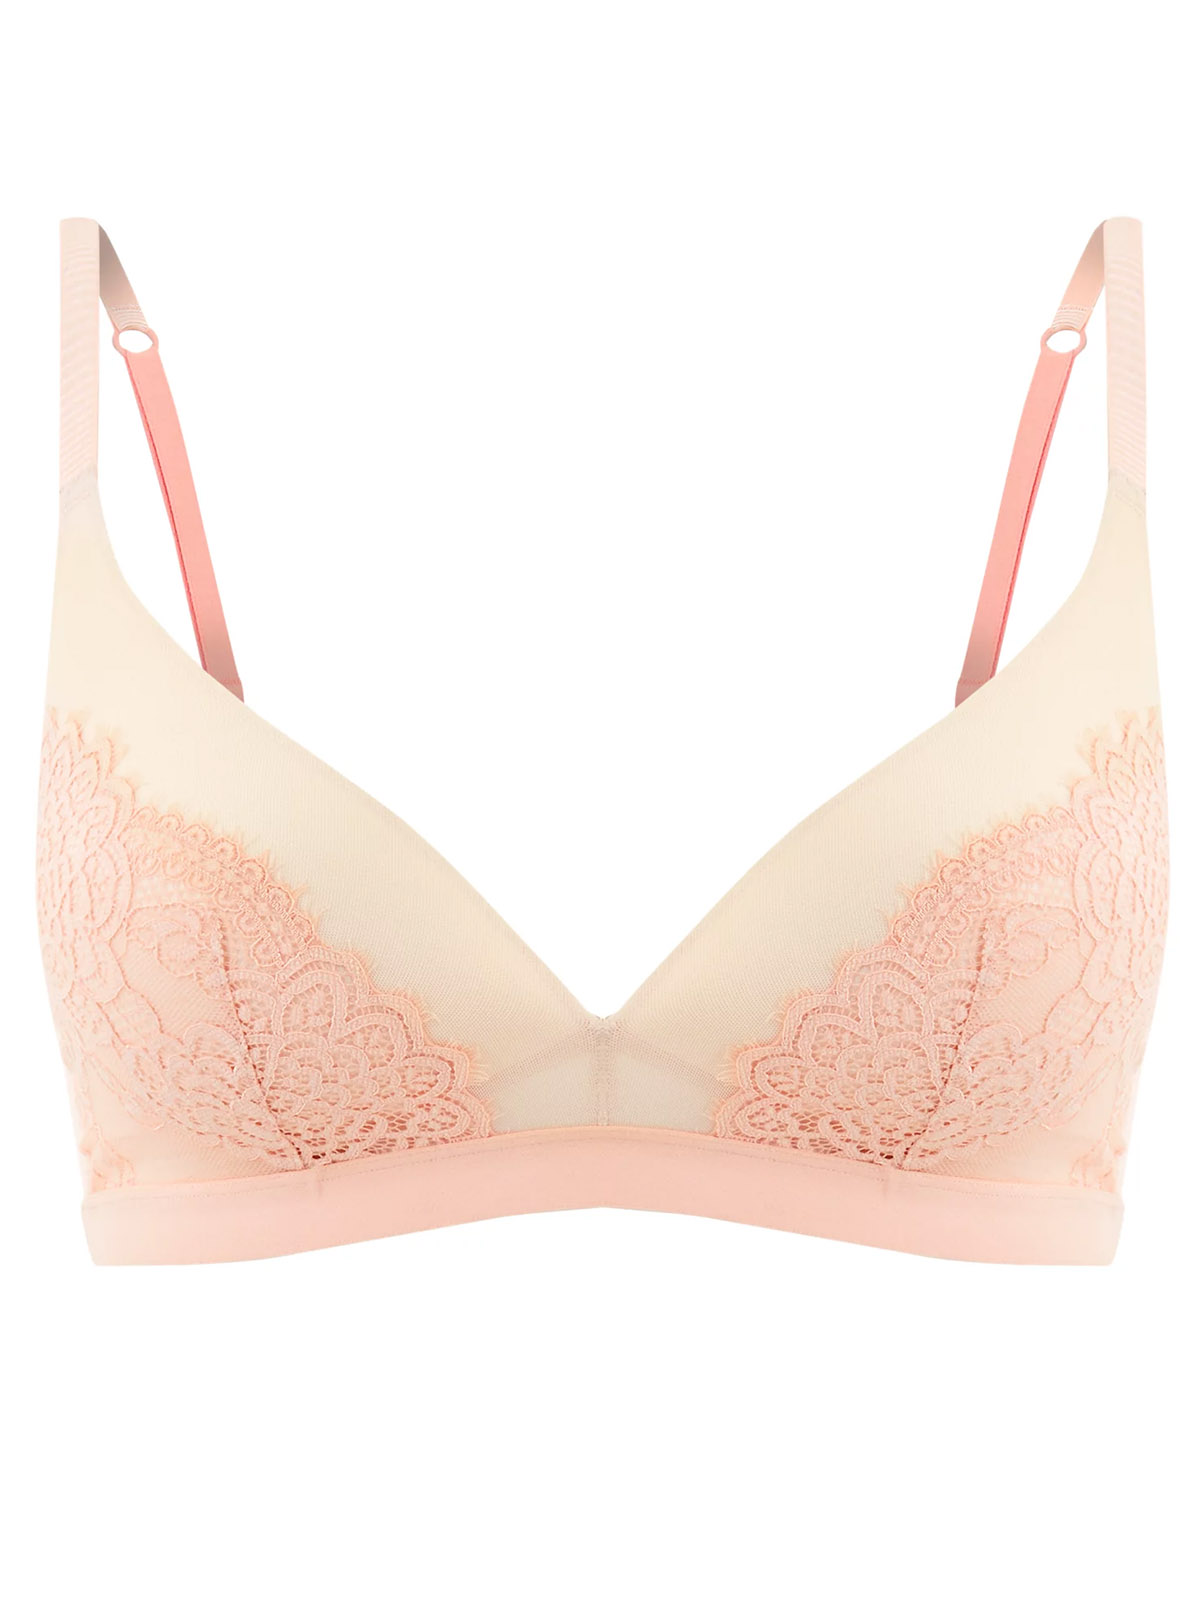  - - PEACH Lace Padded Lounge Plunge Bra - Size 36 to 38 (C-D-DD)